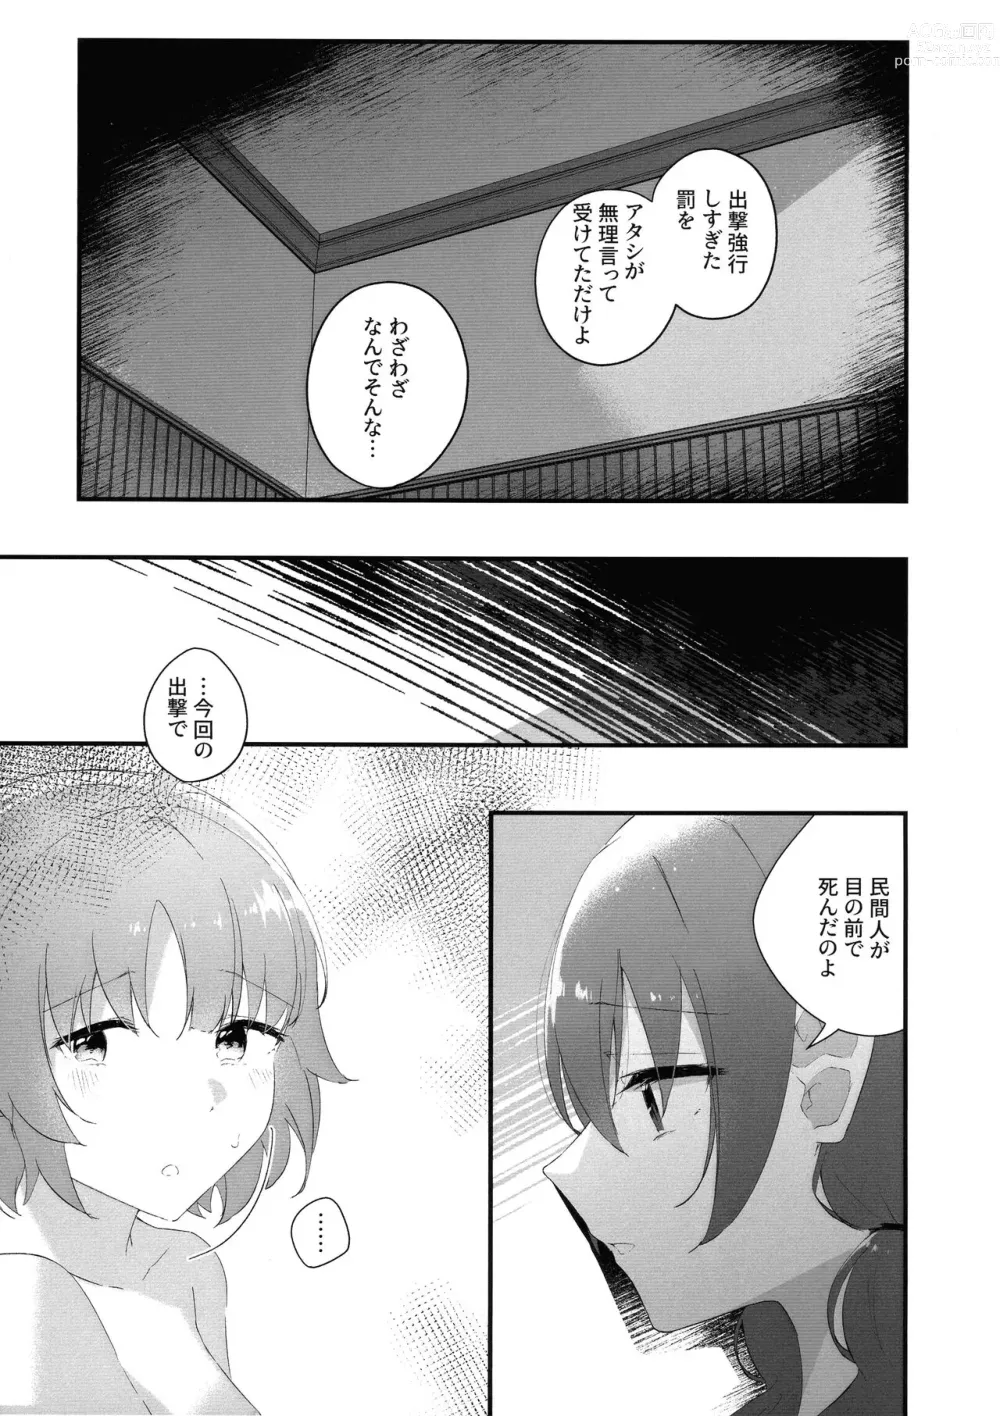 Page 8 of doujinshi Mabataki - without blink, could not find it